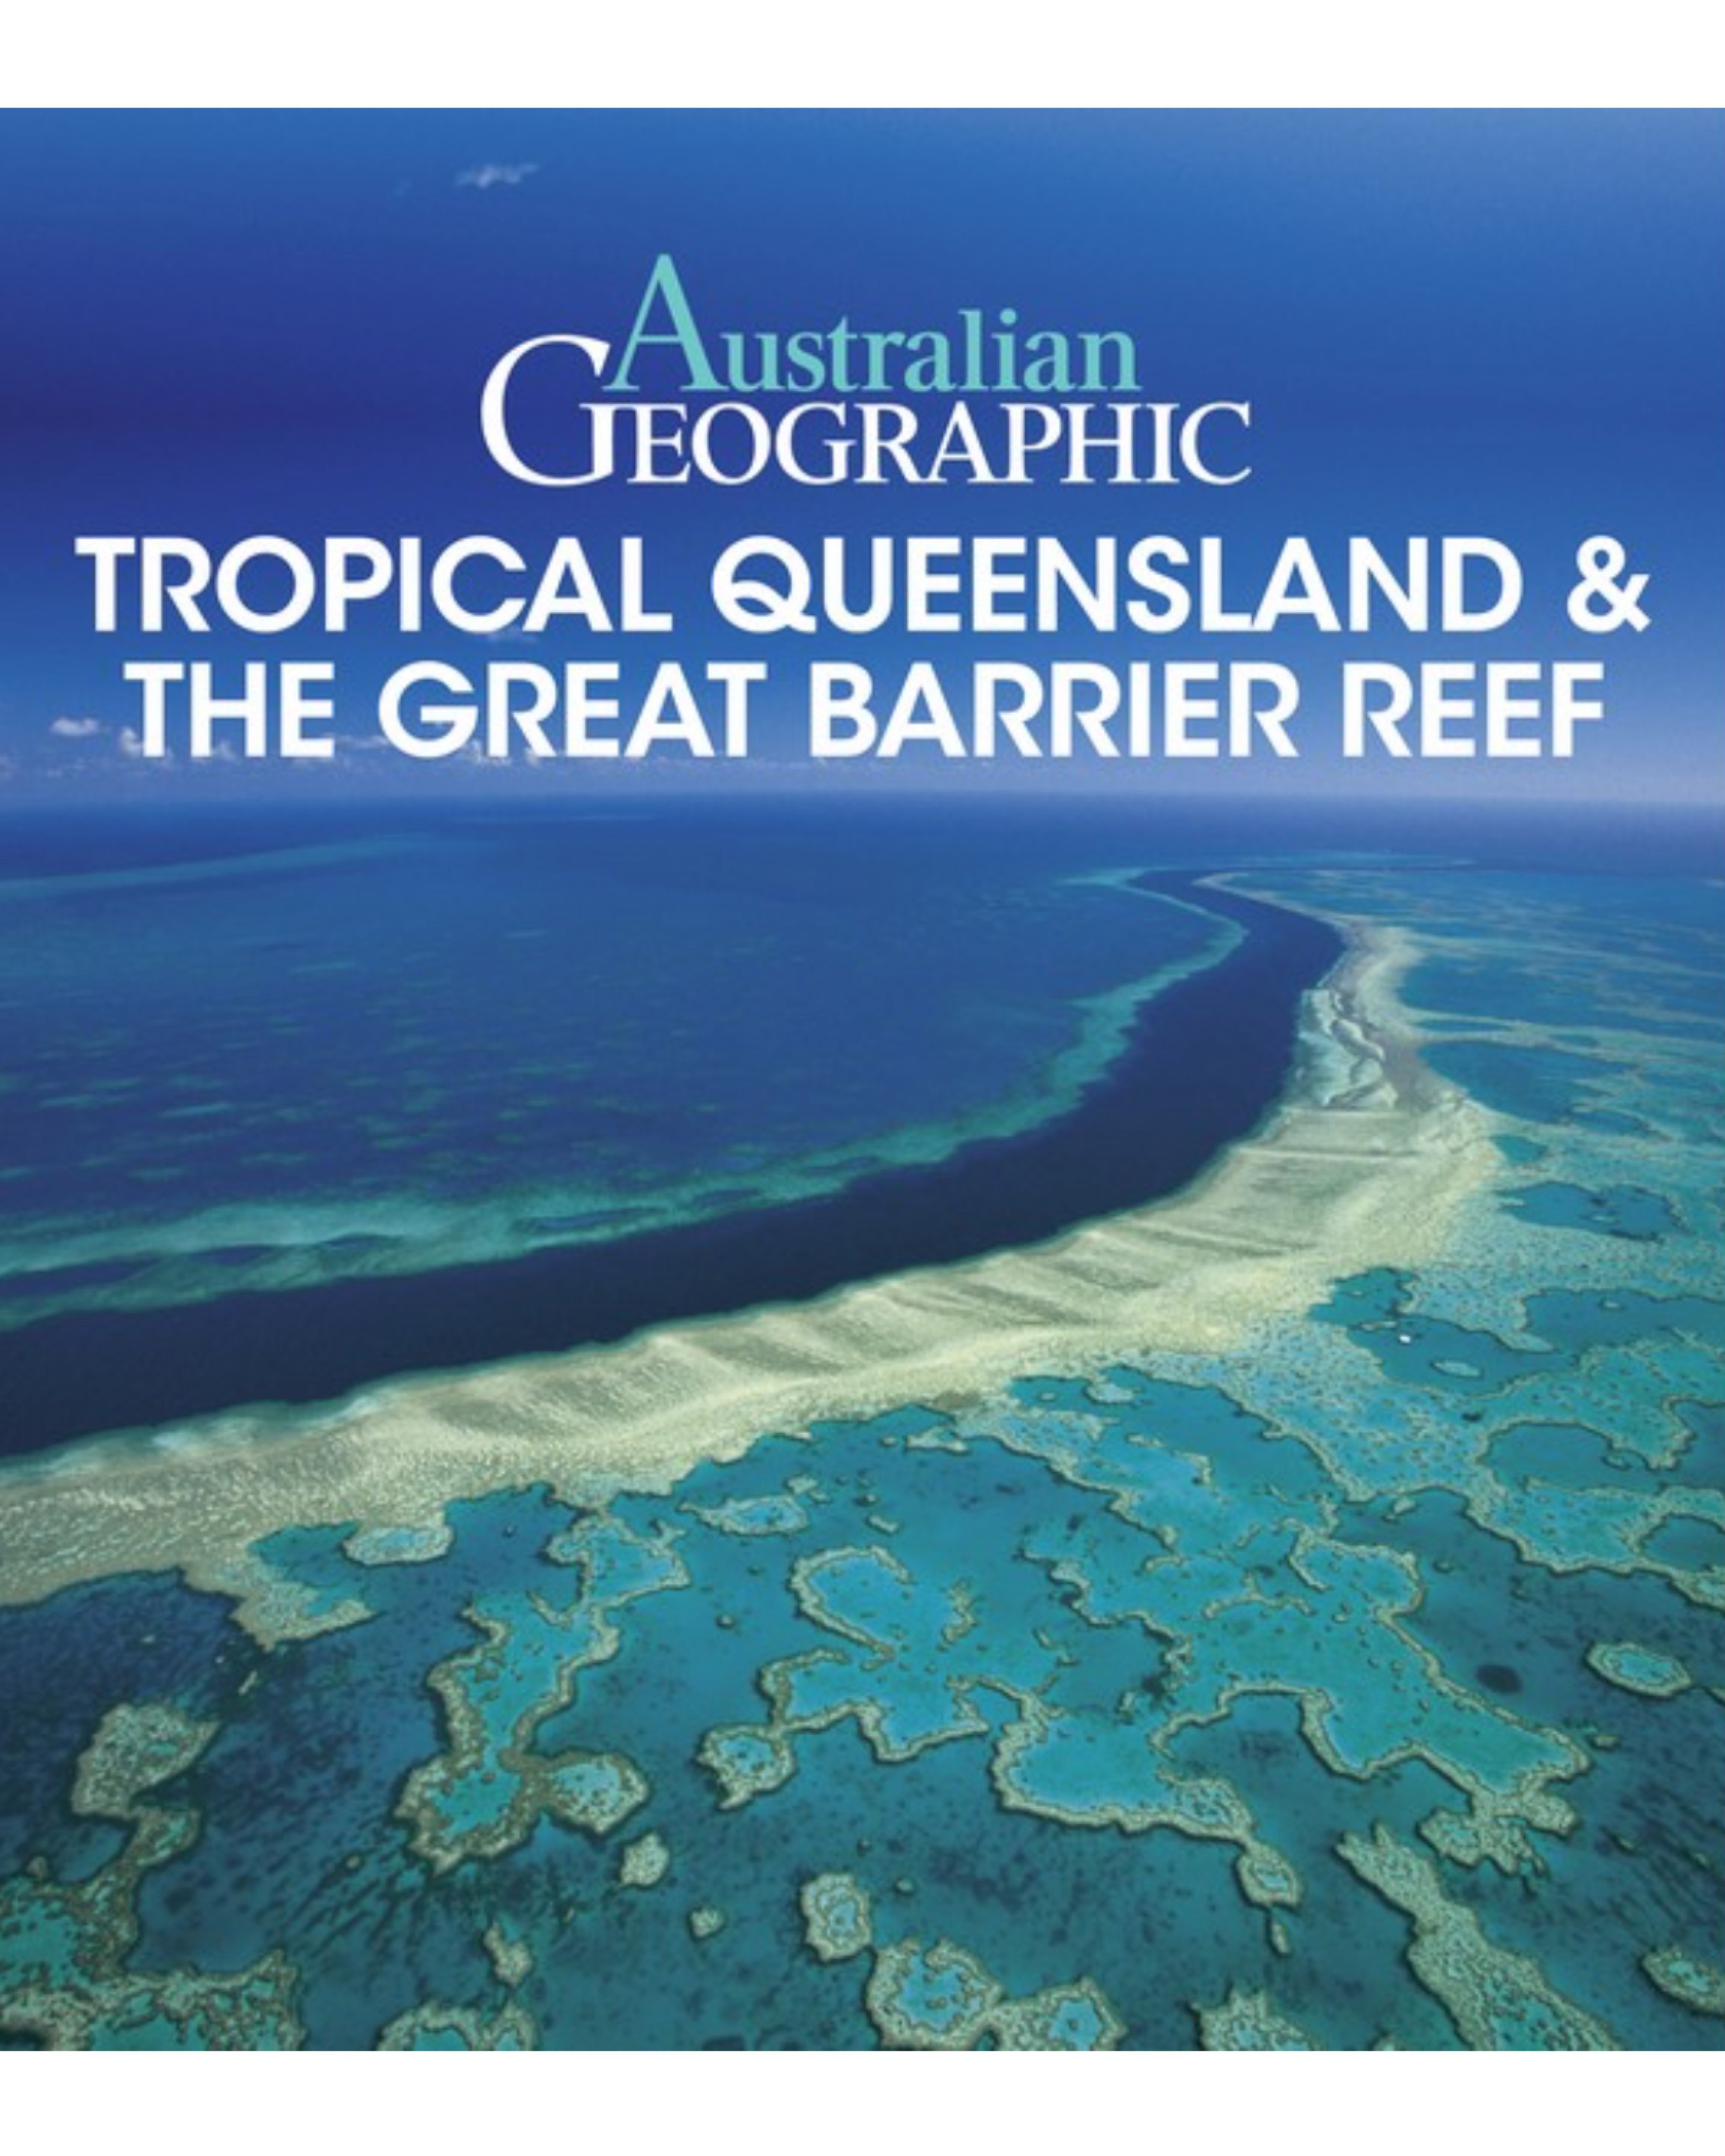 North　Tropical　and　Australian　by　Woodslane　Guide　Geographic　Barrier　Queensland　Book　Great　Reef　Travel　(9781925403978)